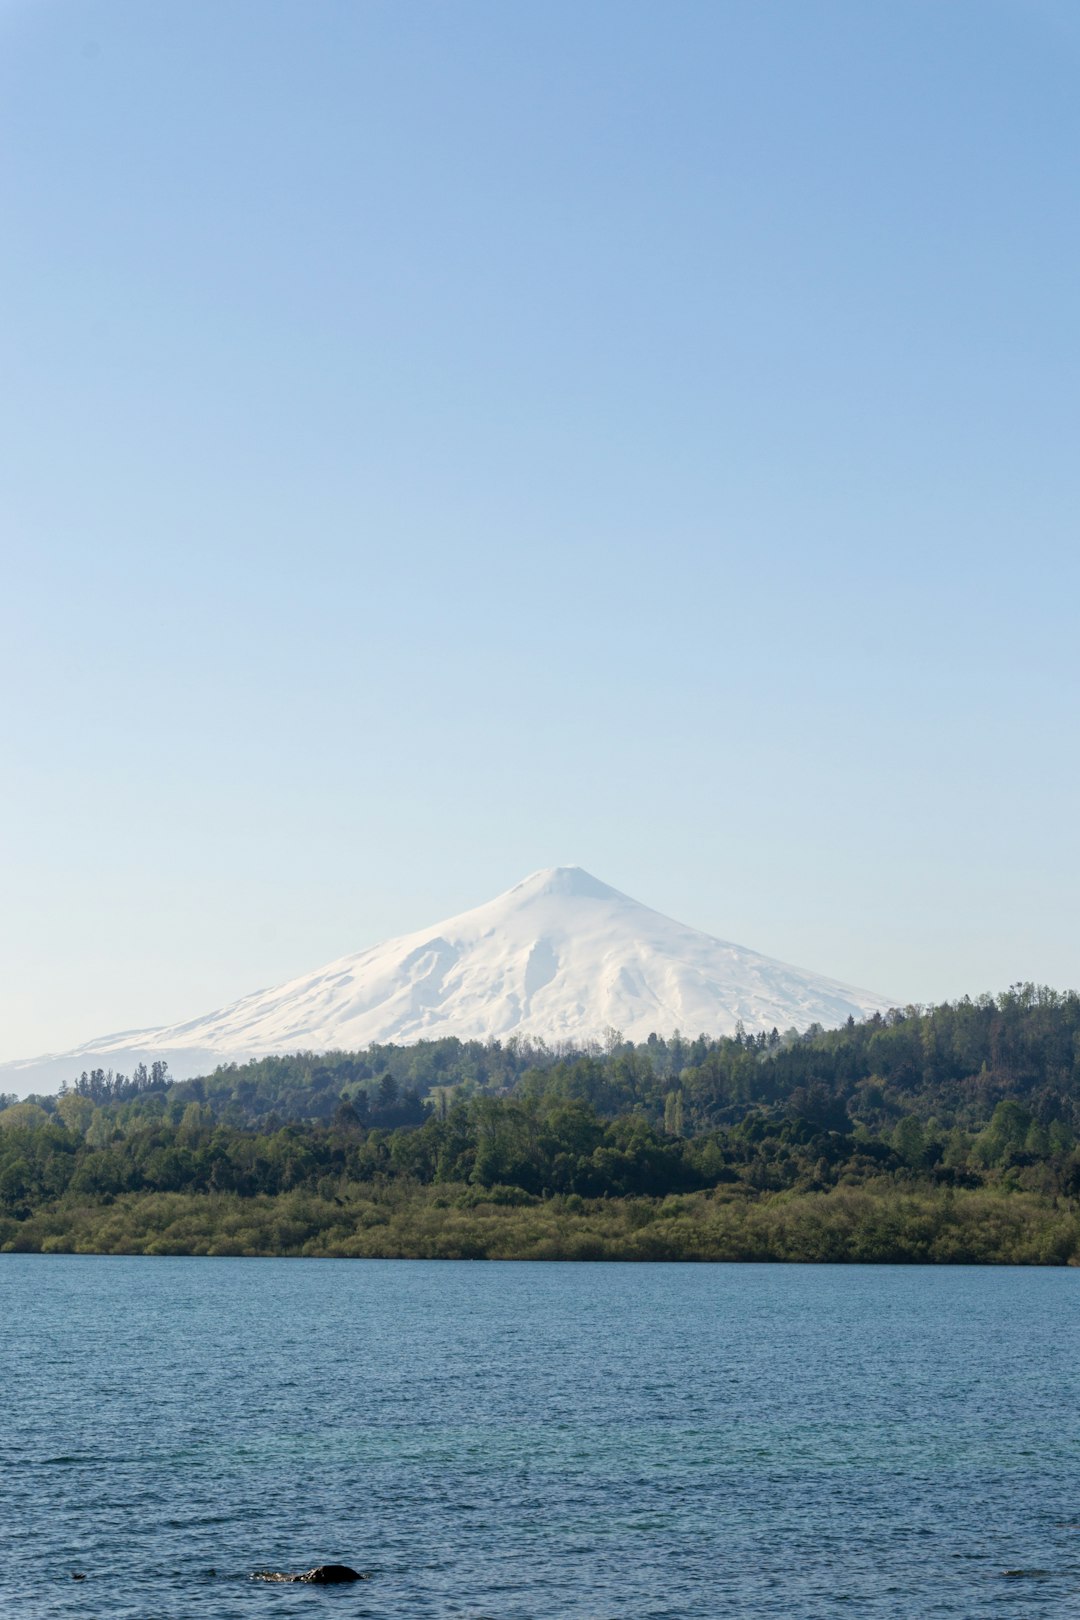 Travel Tips and Stories of Villarrica in Chile